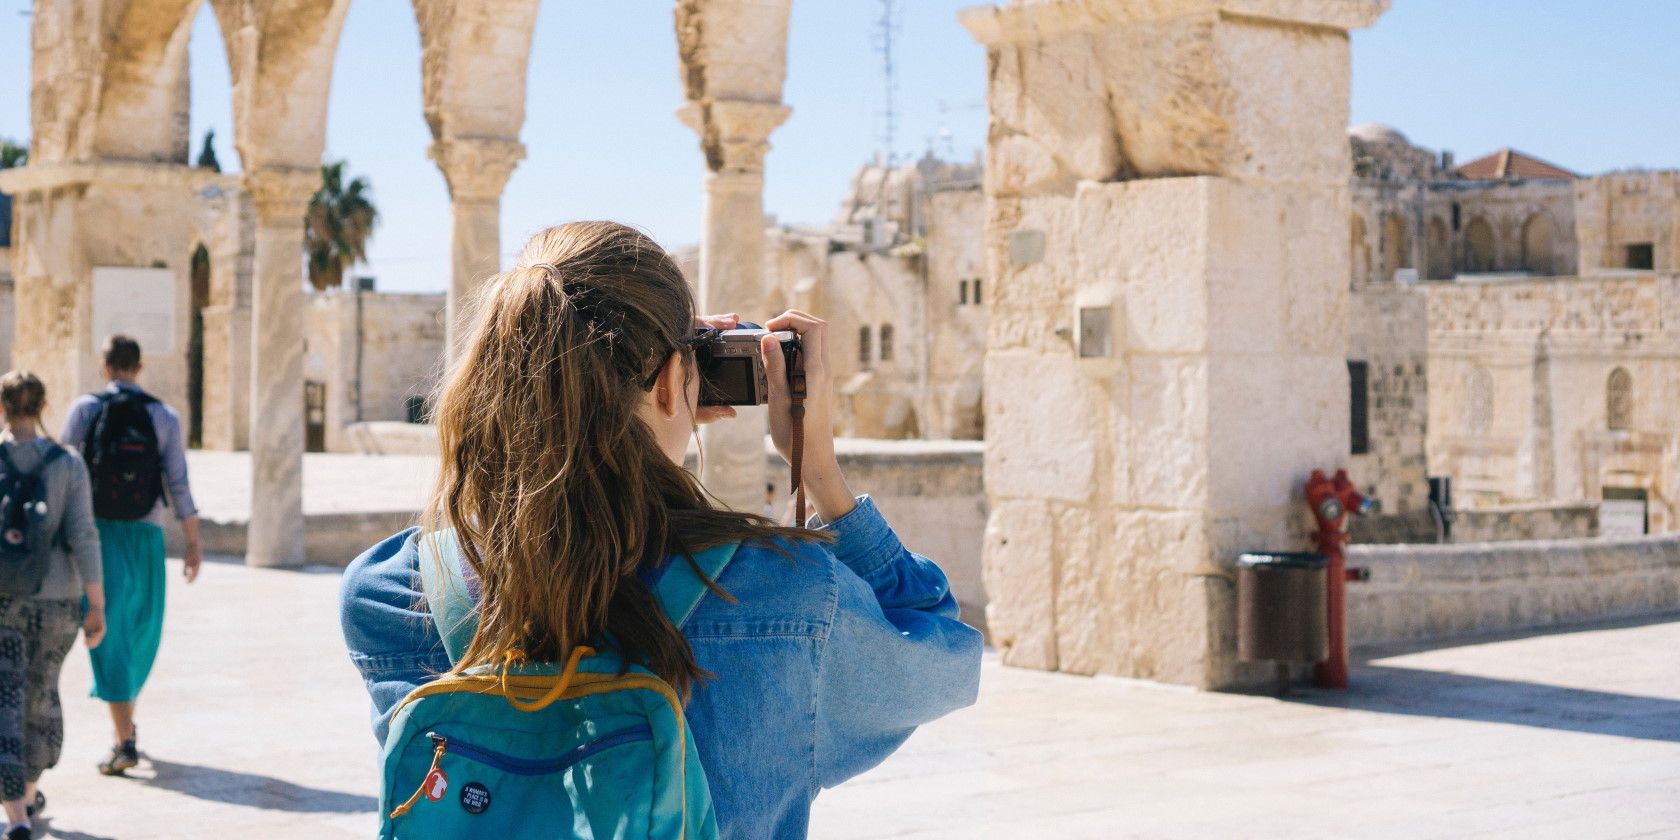 How to Keep Your Camera Safe While Traveling: 8 Tips